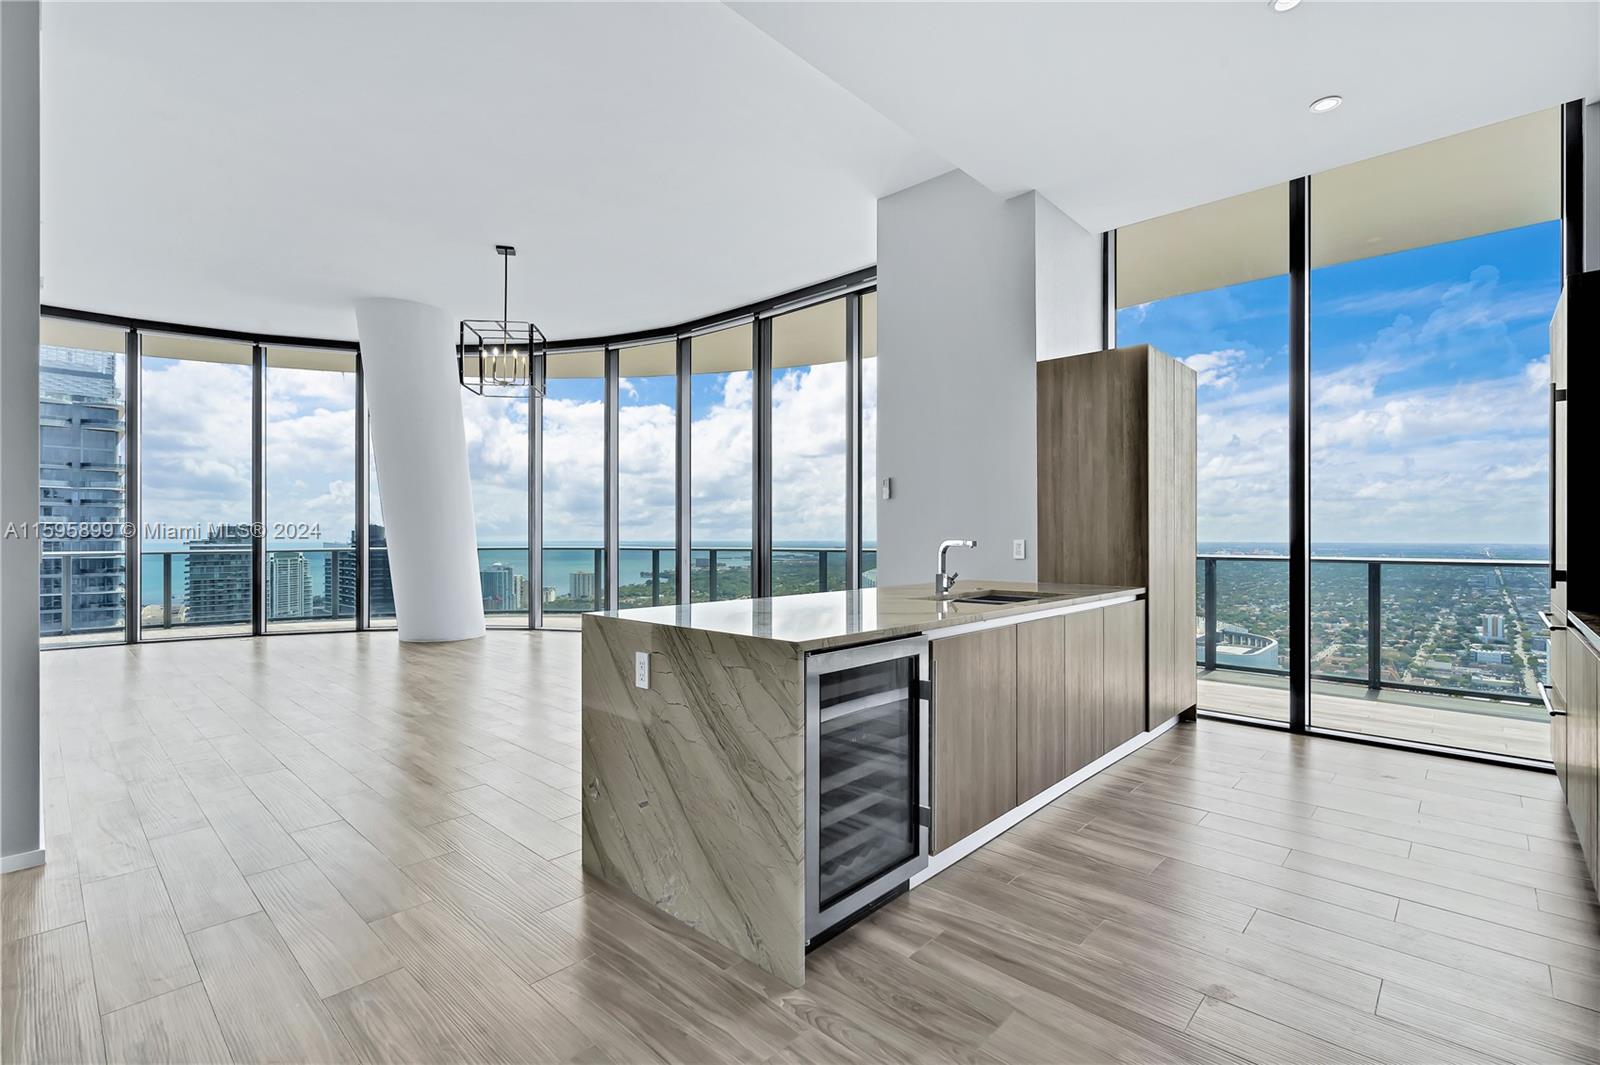 SLS LUX PH with skyline views. Floor to ceiling windows throughout with 12 Ft celling. This 3 bed 3.5 bath is the perfect residence to live in. Includes a private elevator w/biometrics technology. The amenities include SLS LUX Spa & room service from the Katsuya restaurant/bar, access to the 58th level rooftop & pool ,two-story Cava lounge, Jacuzzi, Tennis court, rock-climbing wall, basketball court & full service fitness center. Living at SLS Lux allows you to live in complete luxury and have access to world class amenities & services.